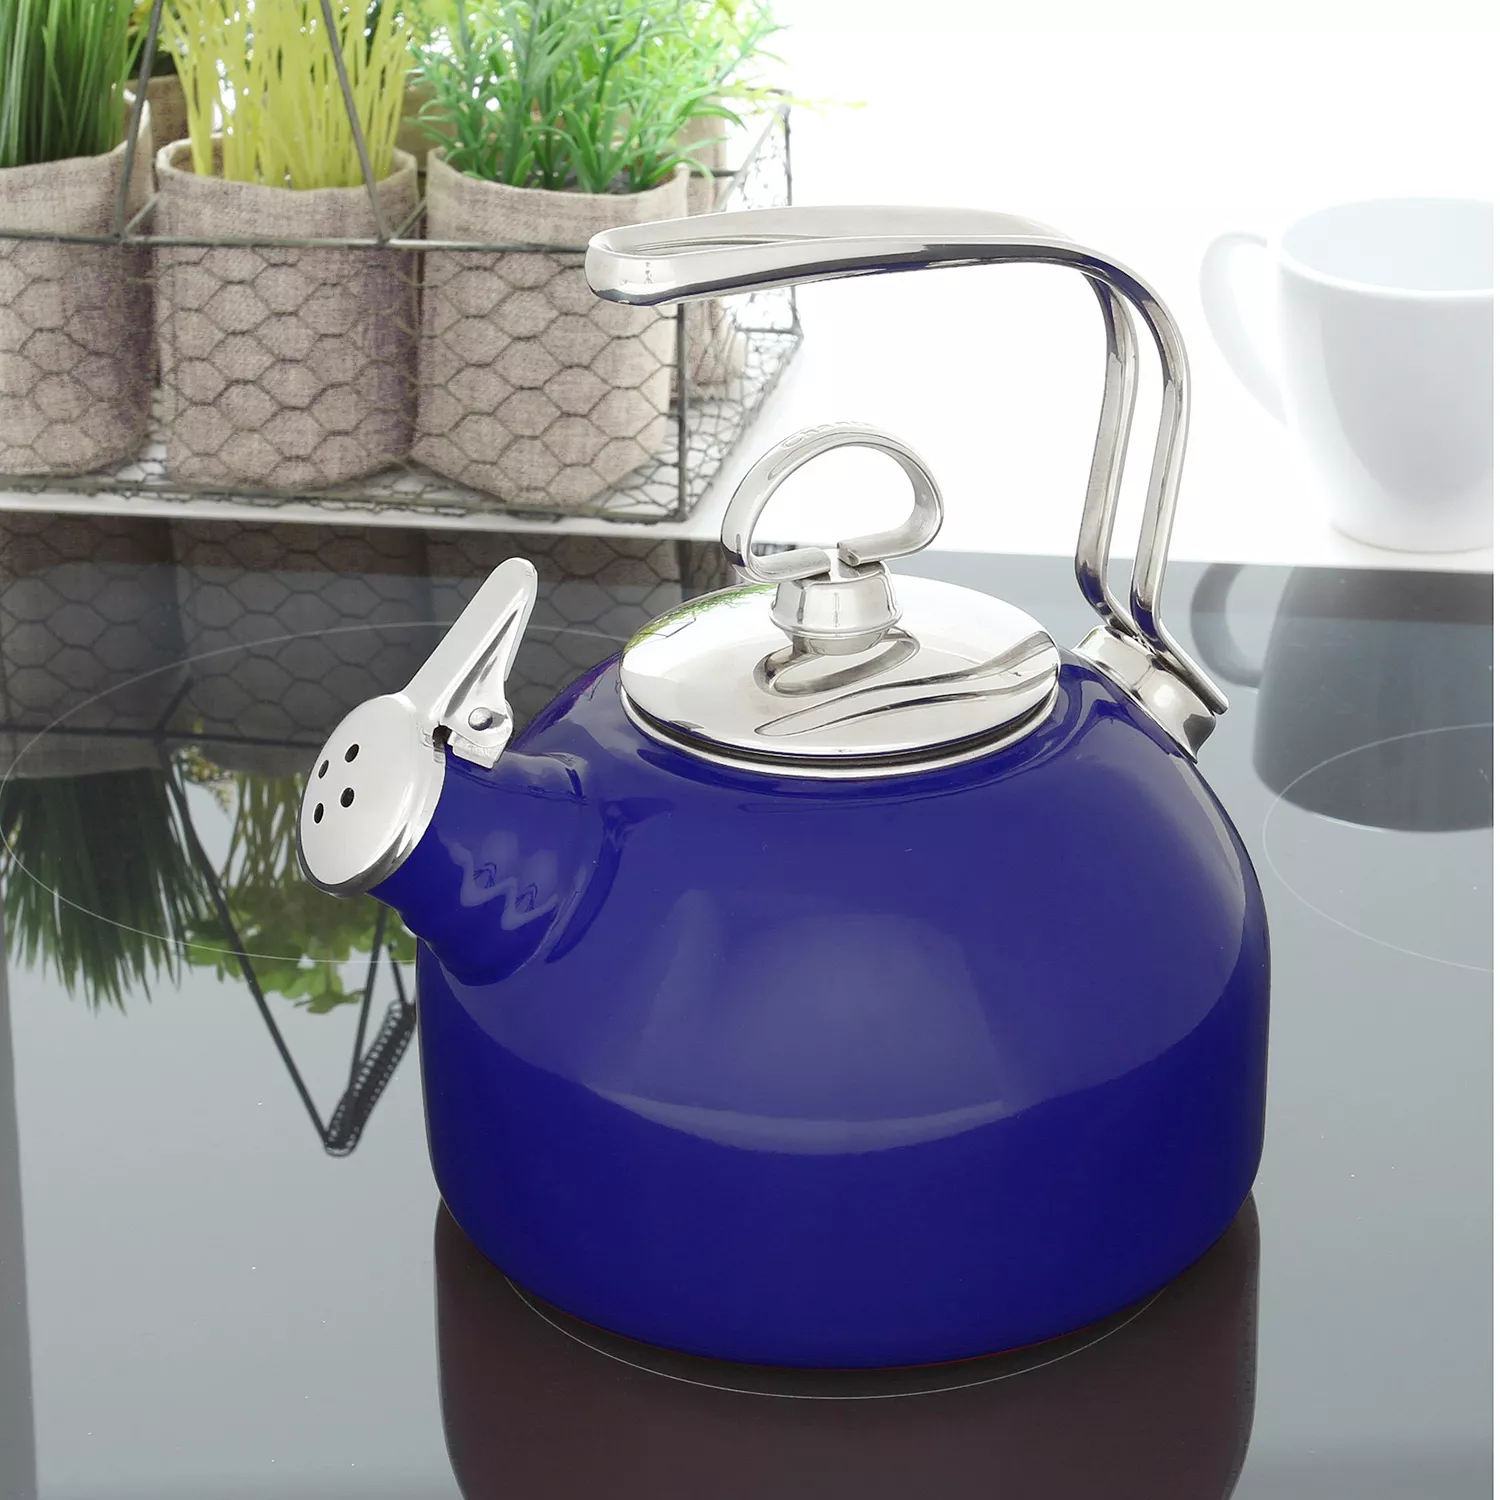 This Retro Tea Kettle Is $20 Off and Will Look So Cool On Your Countertop